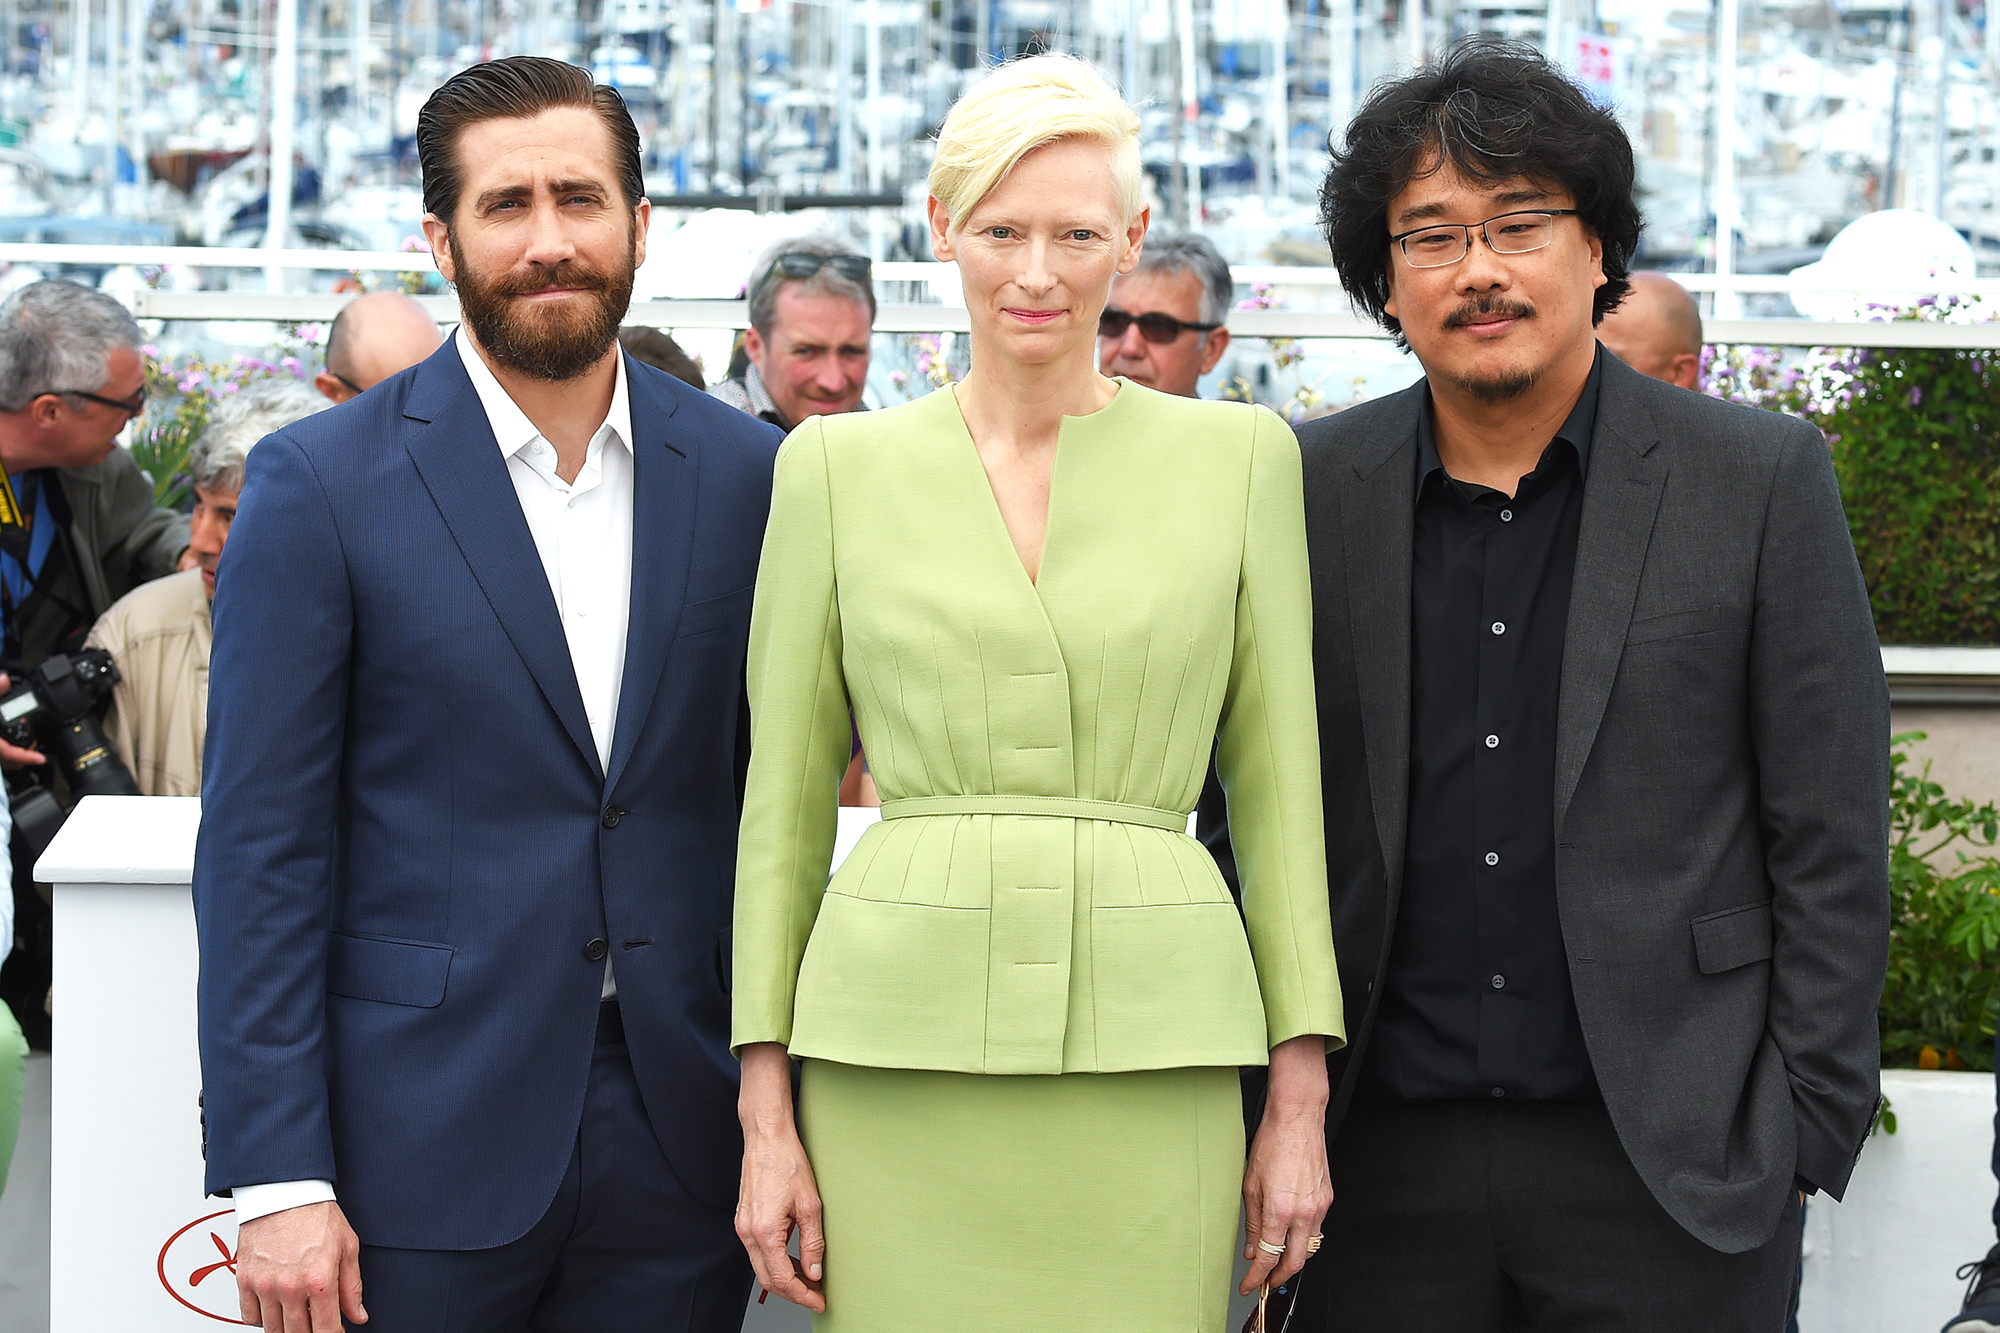 From left: Jake Gyllenhaal, Tilda Swinton and director Bong Joon-Ho in Cannes, France, on May 19, 2017. (Anthony Harvey—Getty Images)